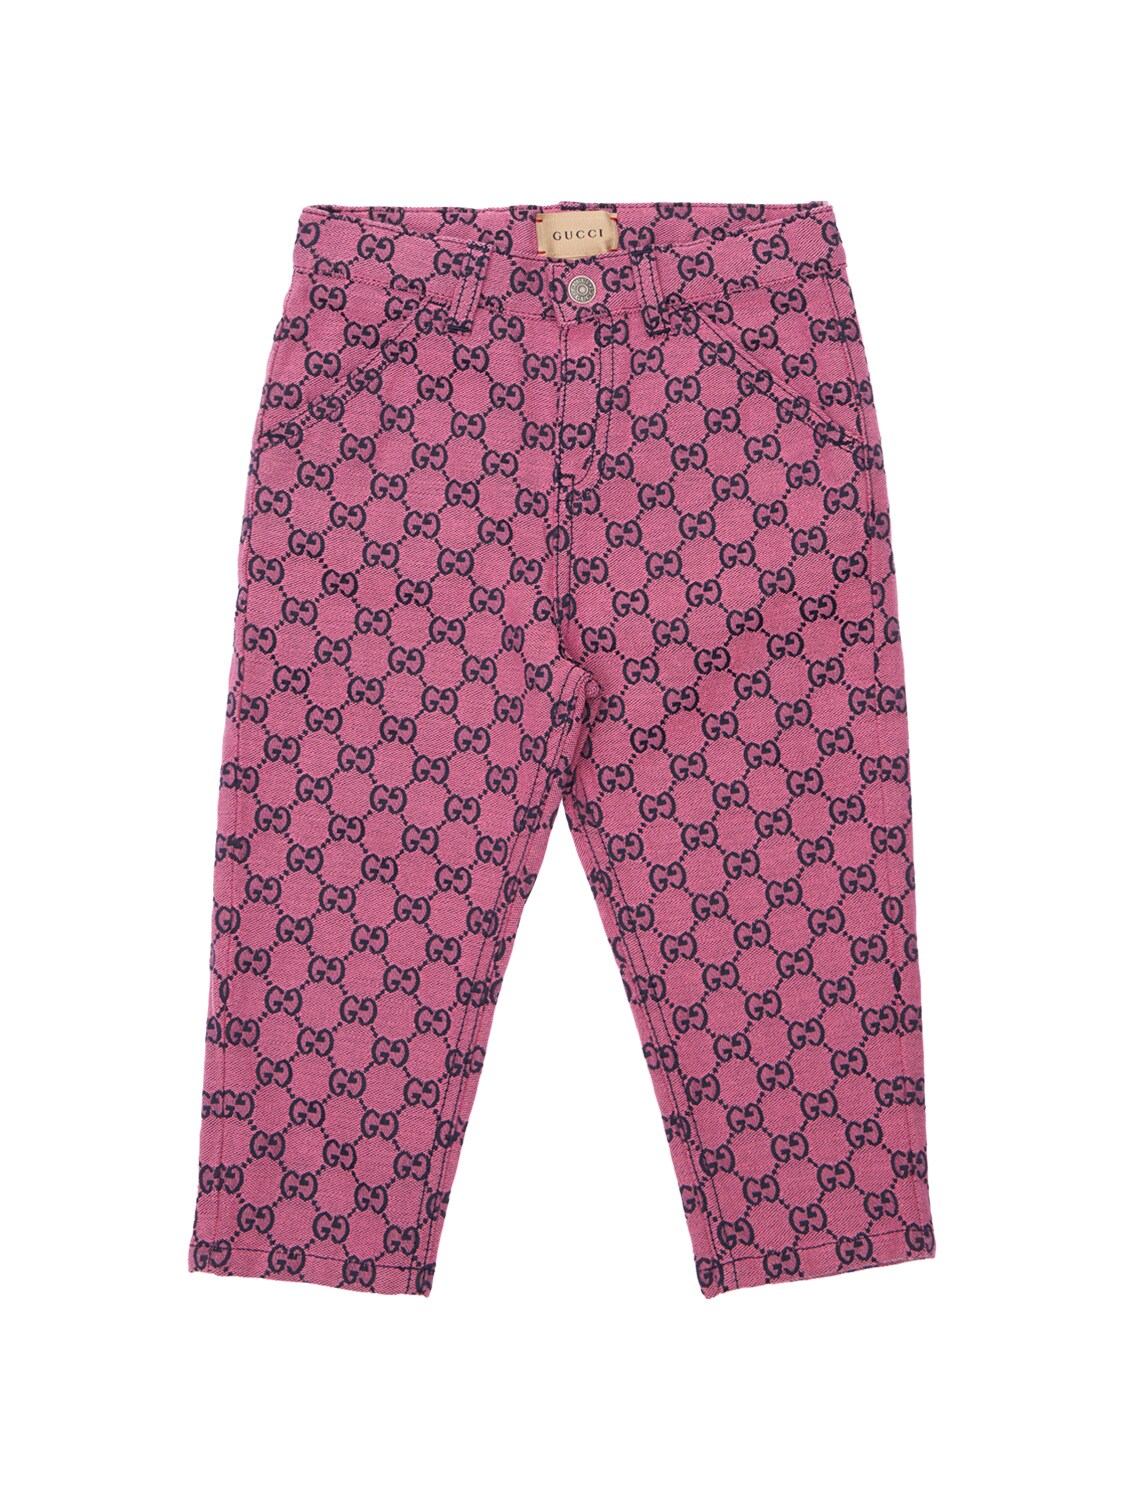 Gucci Kids' Gg Multicolor帆布裤子 In Pink,navy